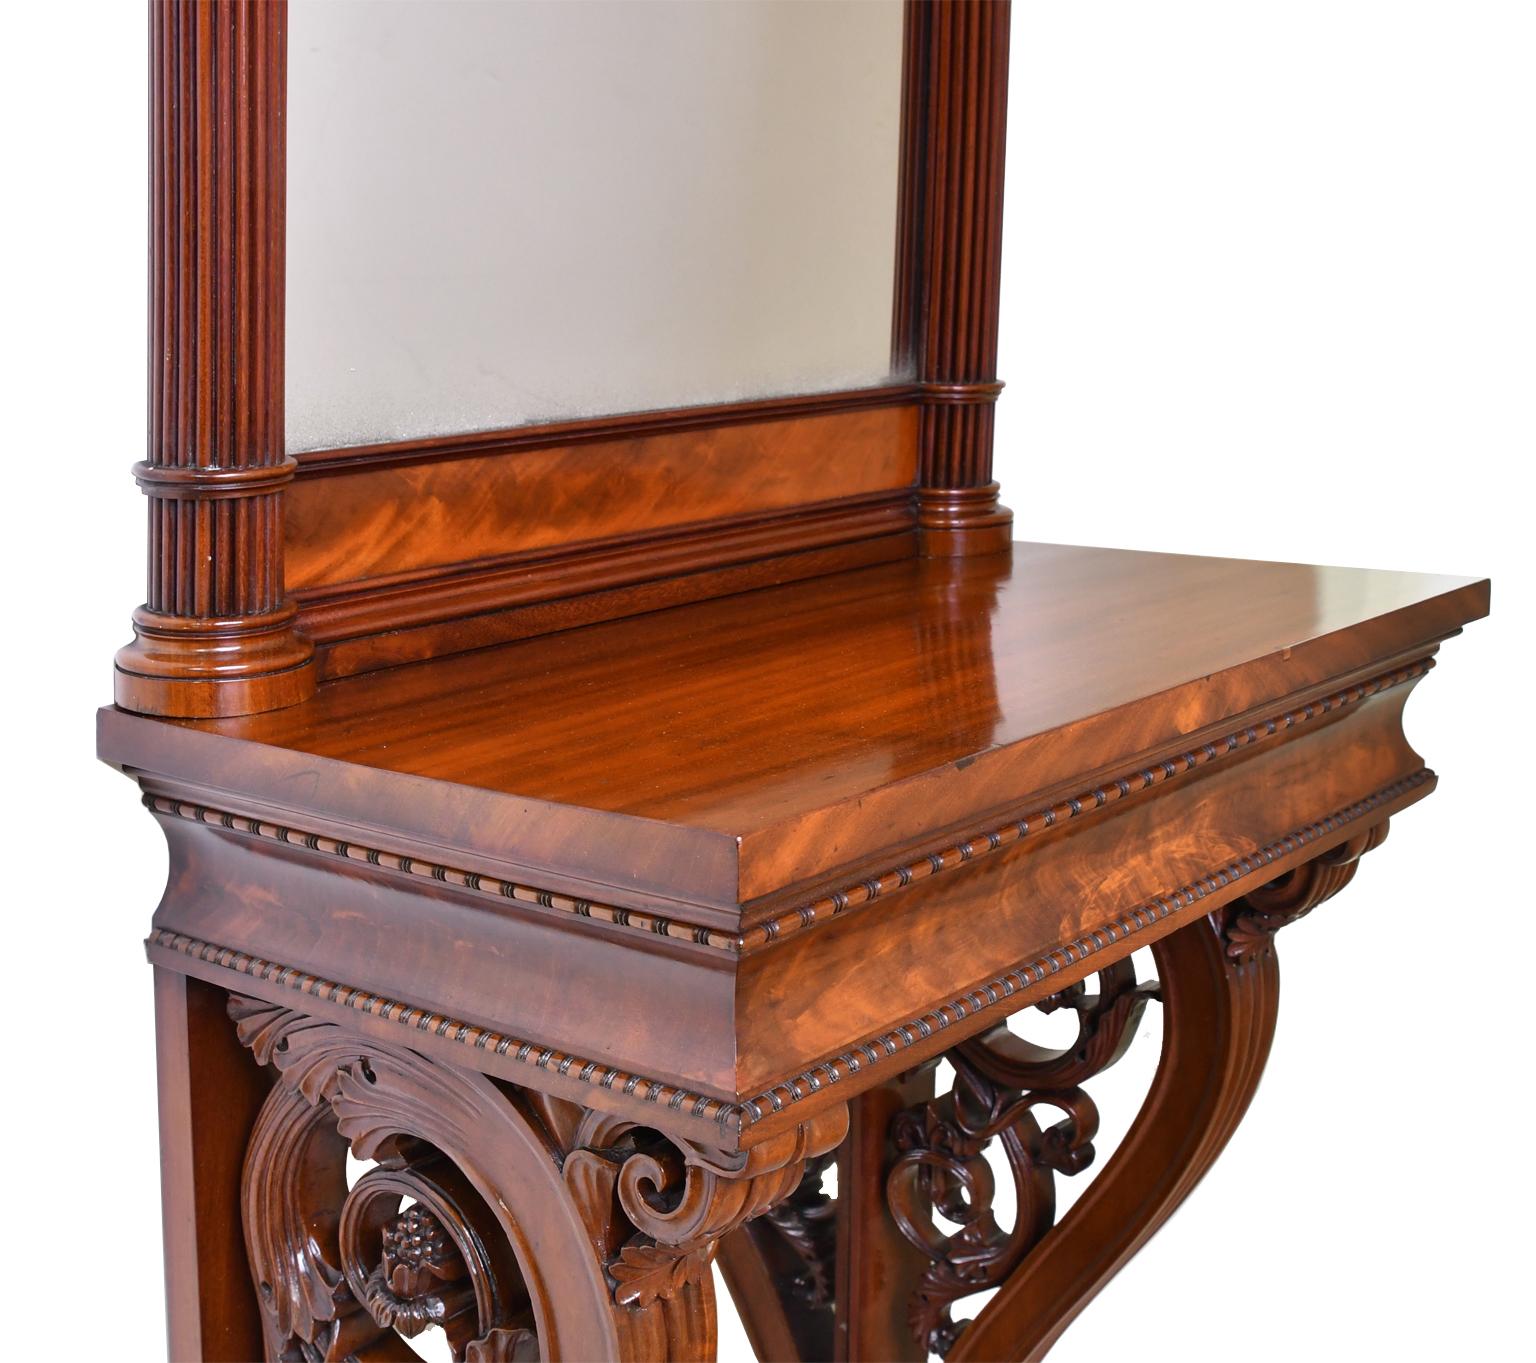 Tall Neoclassical-Style Console & Pier Mirror in Mahogany, Denmark, c. 1830 4